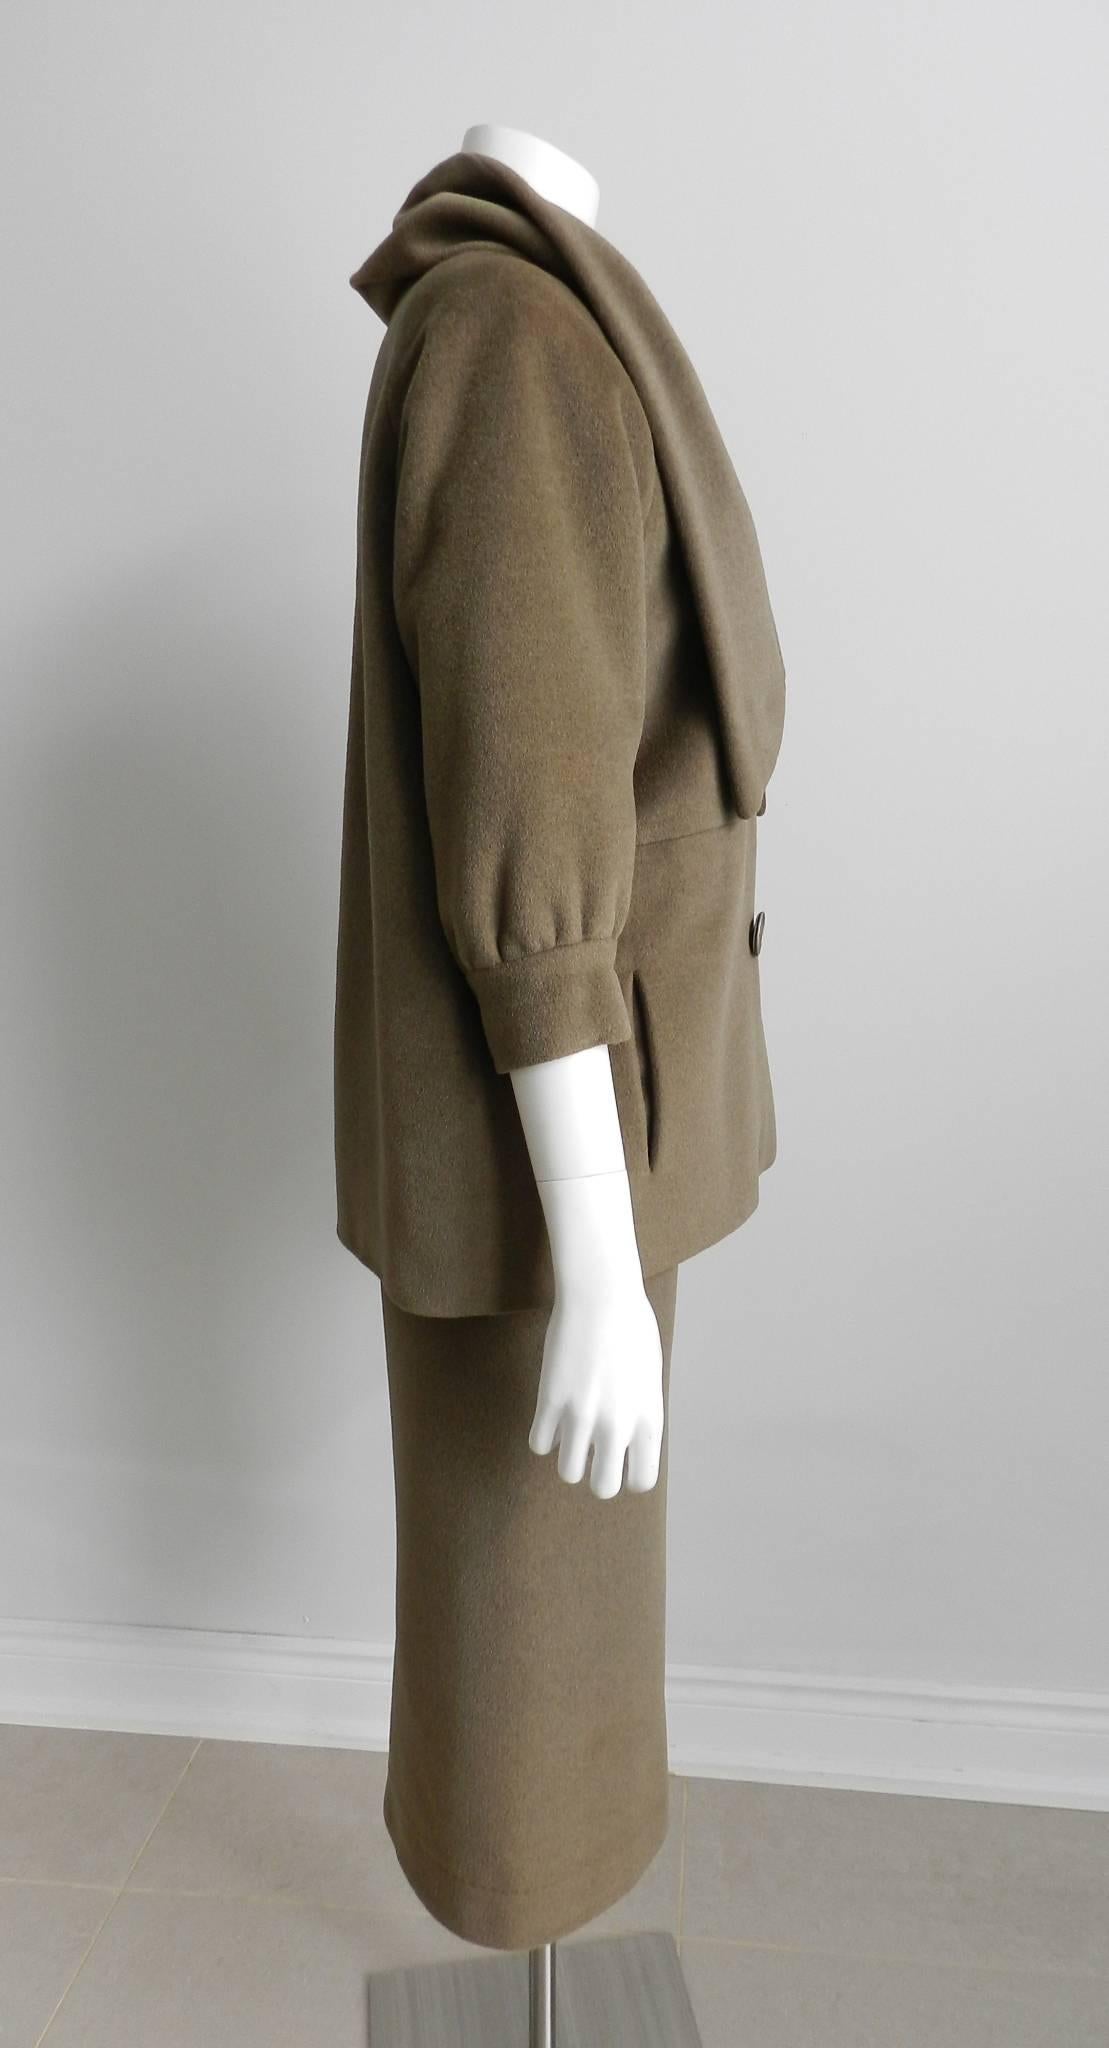 Nina Ricci vintage early 1960's cashmere skirt suit. Mossy green or brownish olive color.  Velvet waistband on skirt and acetate lined. Skirt waist measures 31" (Unsure if original waistband was replaced with velvet waistband to allow for